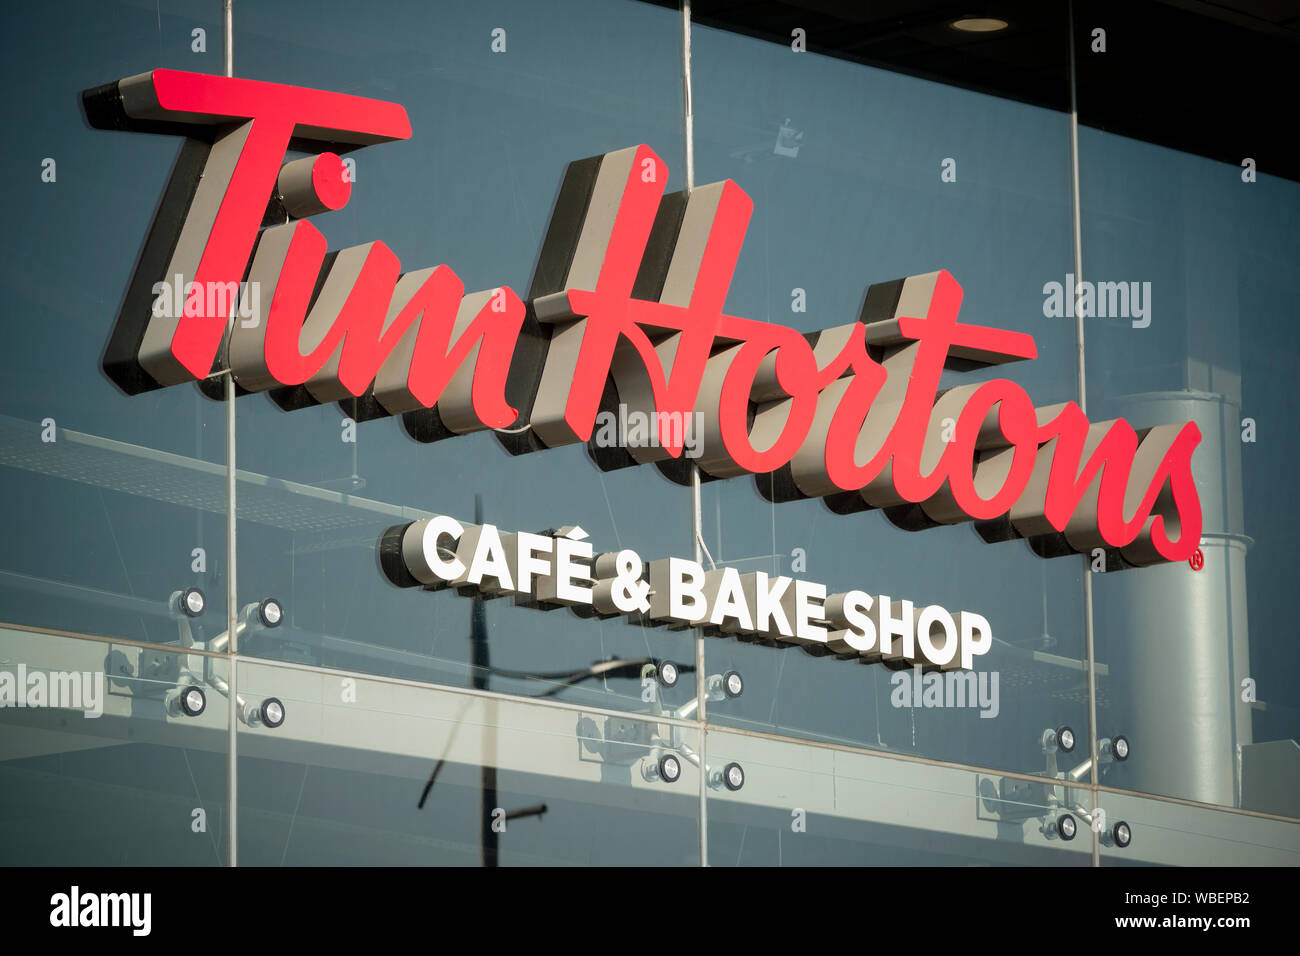 Signage indicating a drive thru branch of the Tim Hortons cafe and bake shop located on Bury New Road in Manchester, UK. Stock Photo